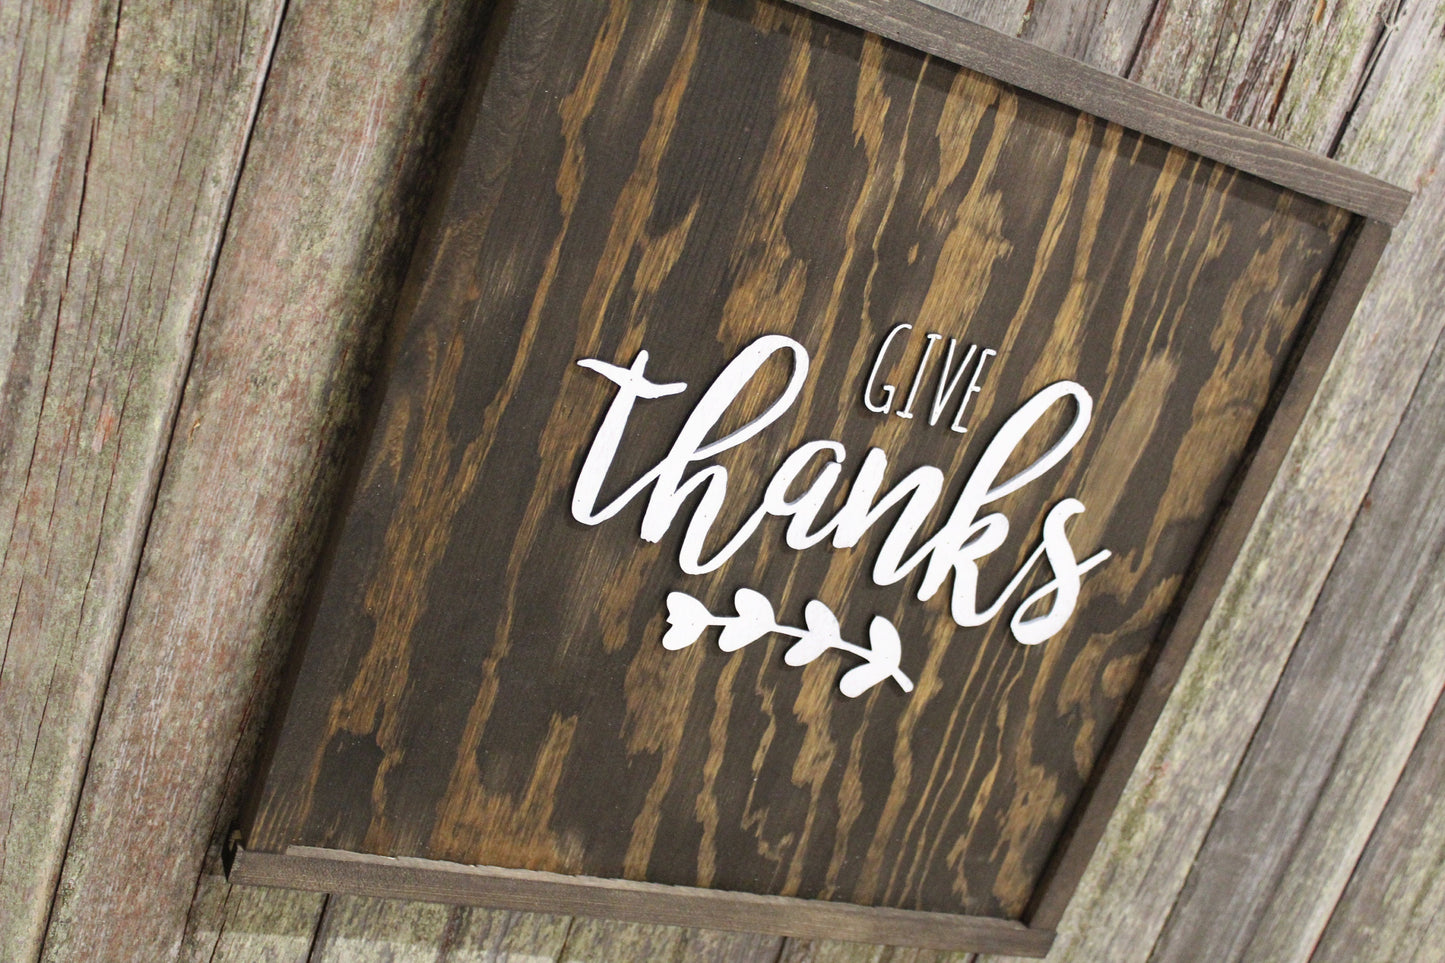 Give Thanks Wood Sign Raised Text 3D Stands off the Board Holiday Sign Thanksgiving Autumn Wooden Sign Wood Primitive Wall Décor